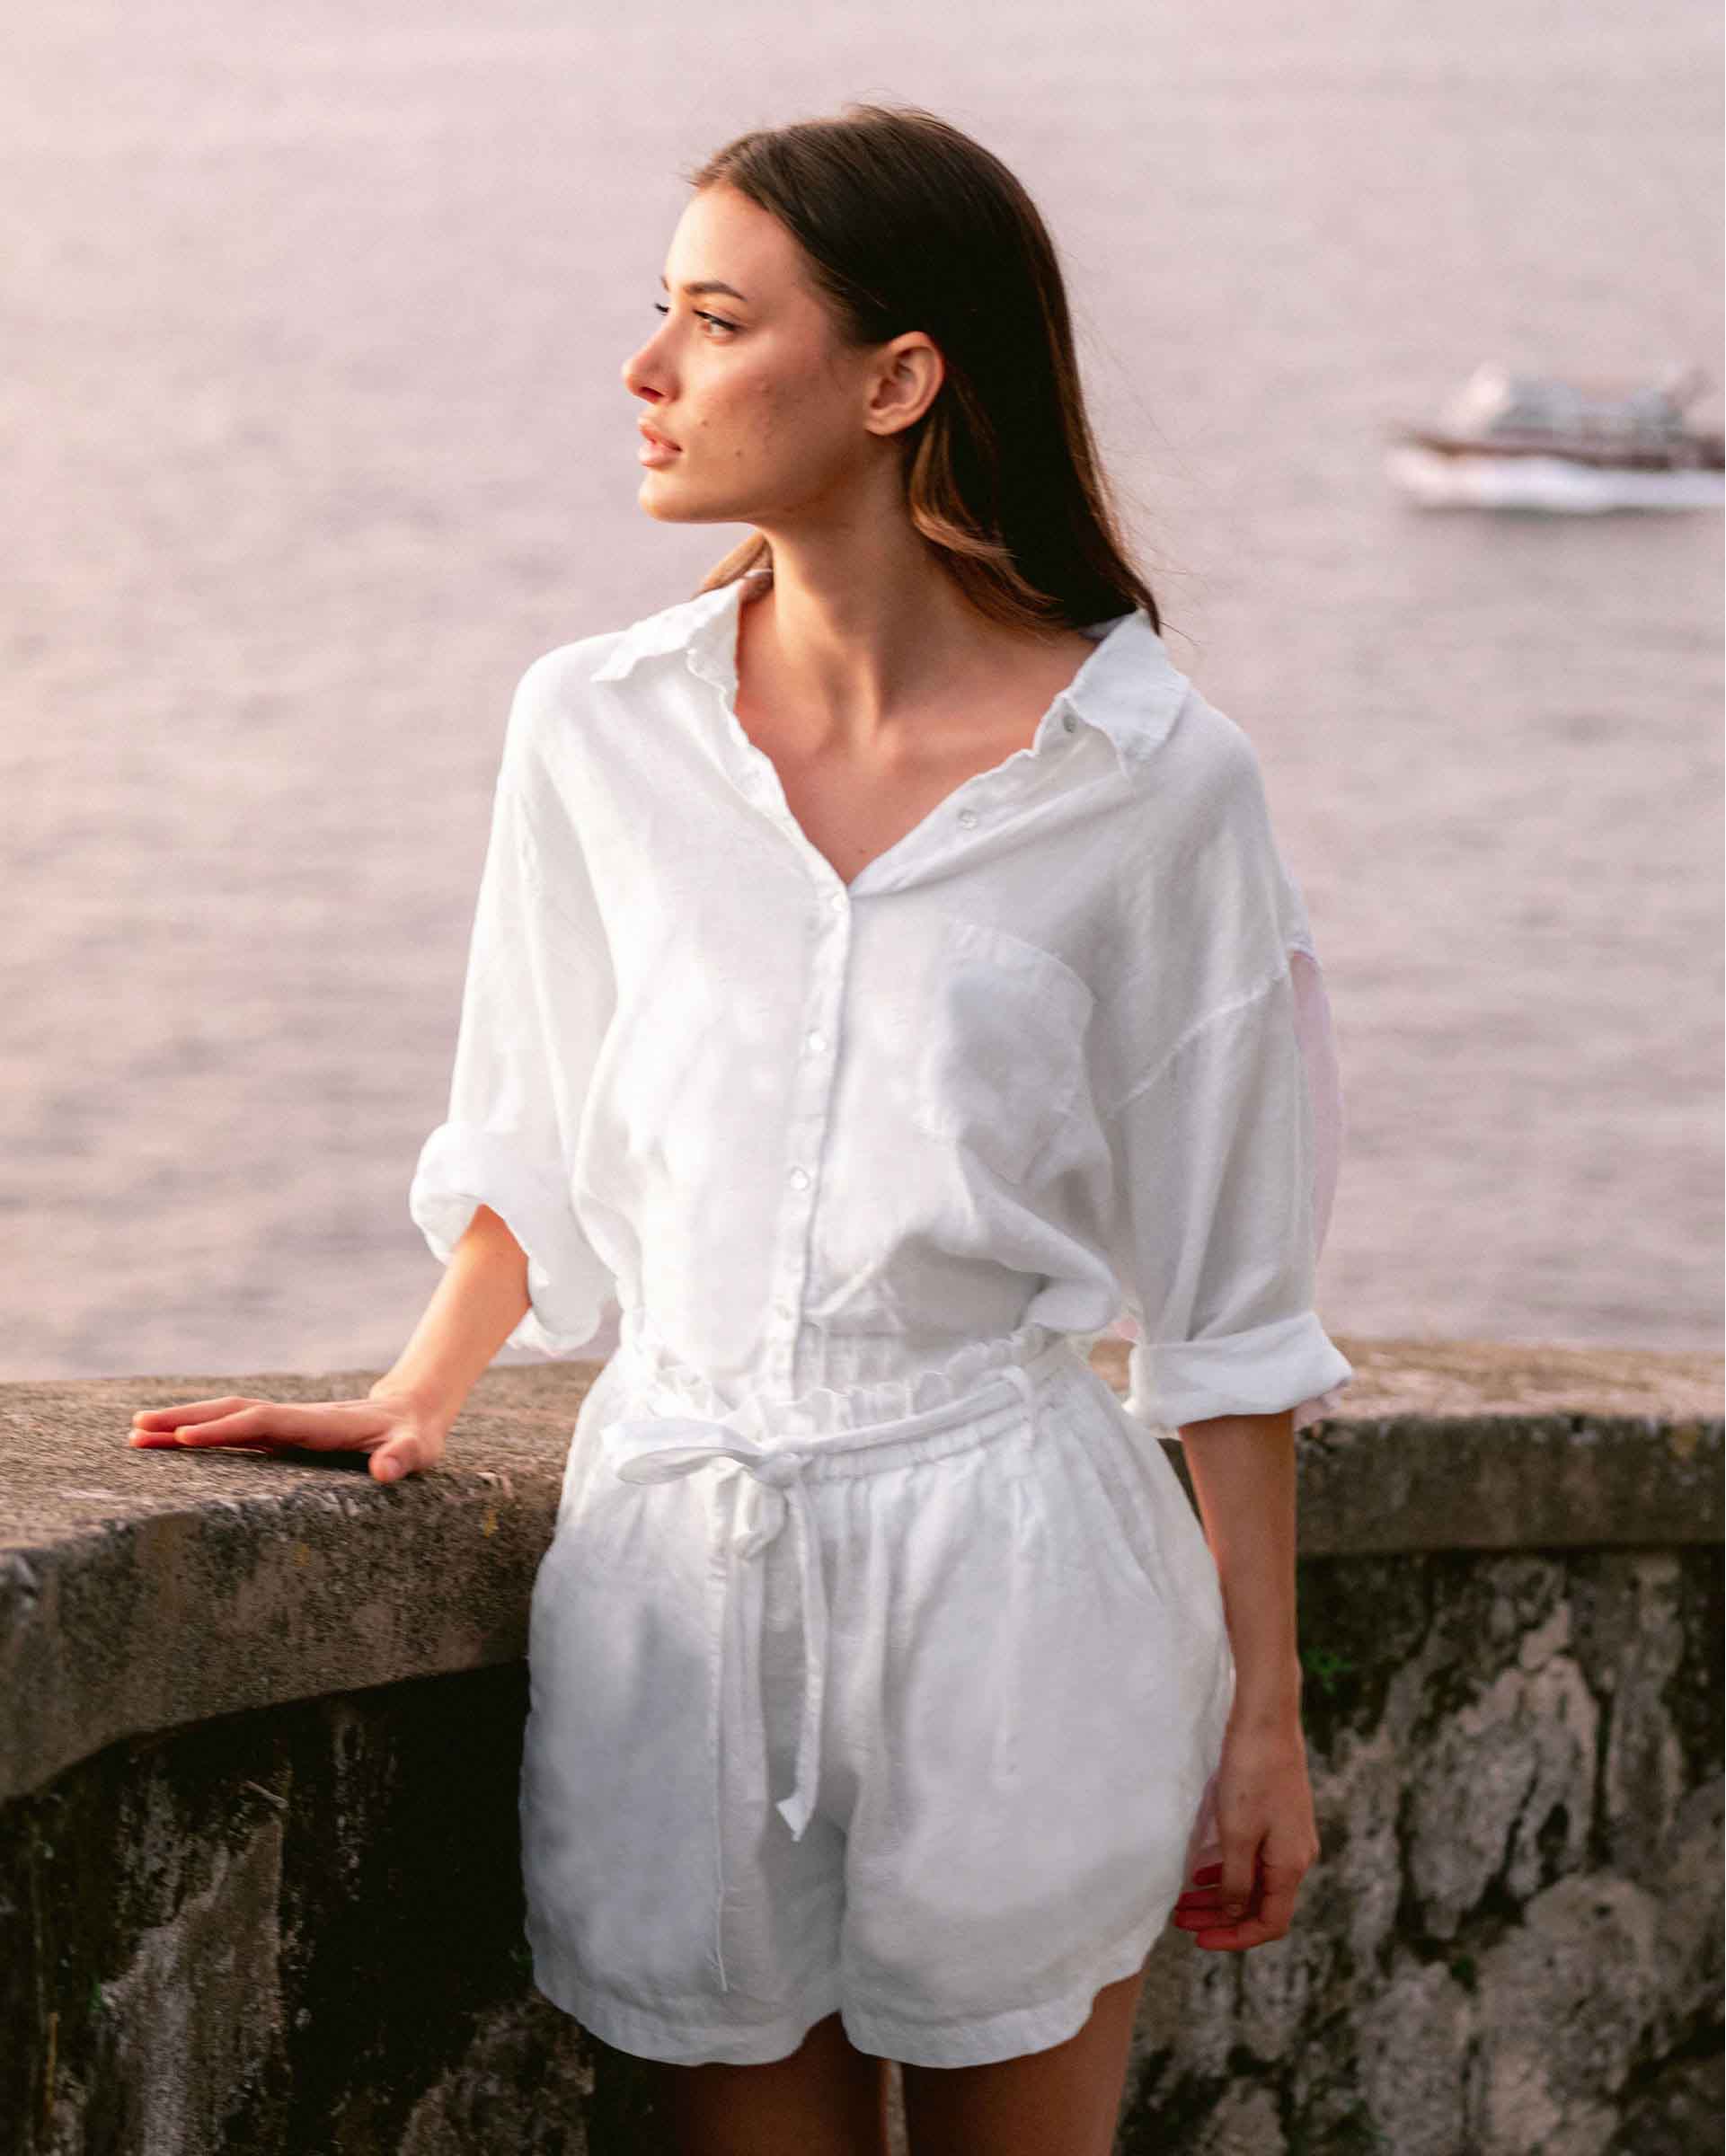 Female wearing a white button shirt and matching short in front of the ocean at sunset